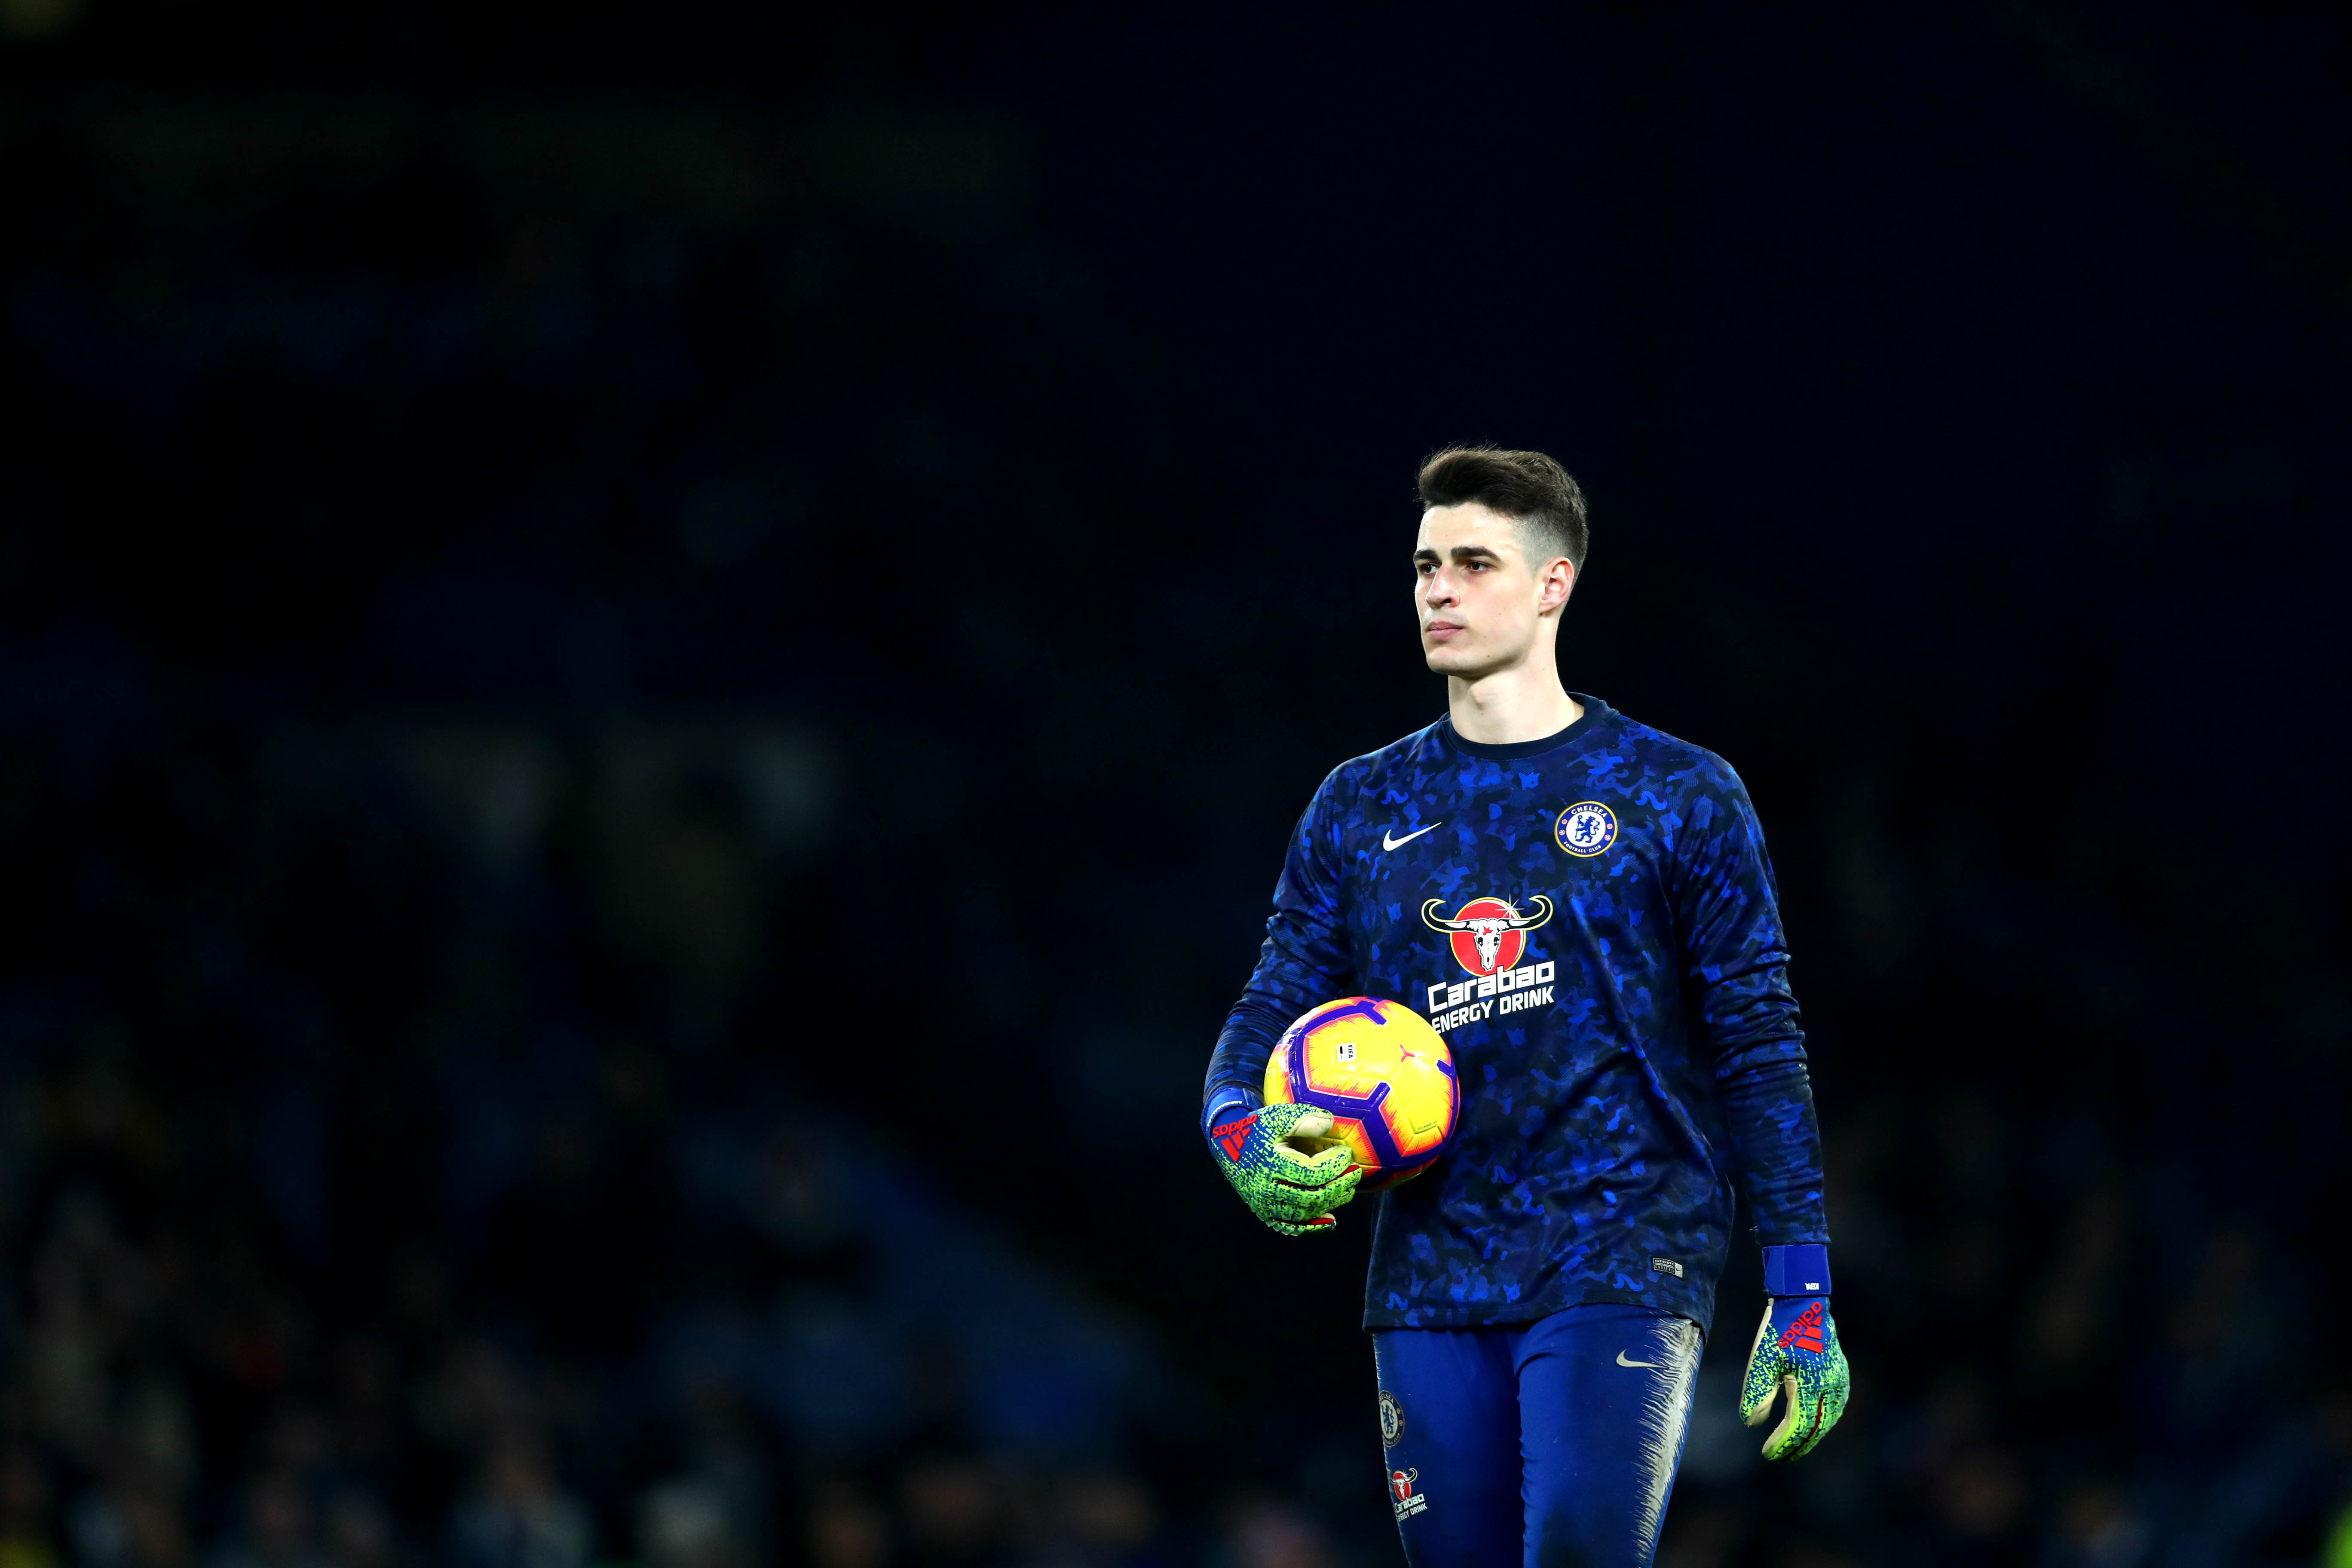 LONDON, ENGLAND - FEBRUARY 27: Kepa Arrizabalaga of Chelsea warms up prior to the Premier League match between Chelsea FC and Tottenham Hotspur at Stamford Bridge on February 27, 2019 in London, United Kingdom. (Photo by Clive Rose/Getty Images)